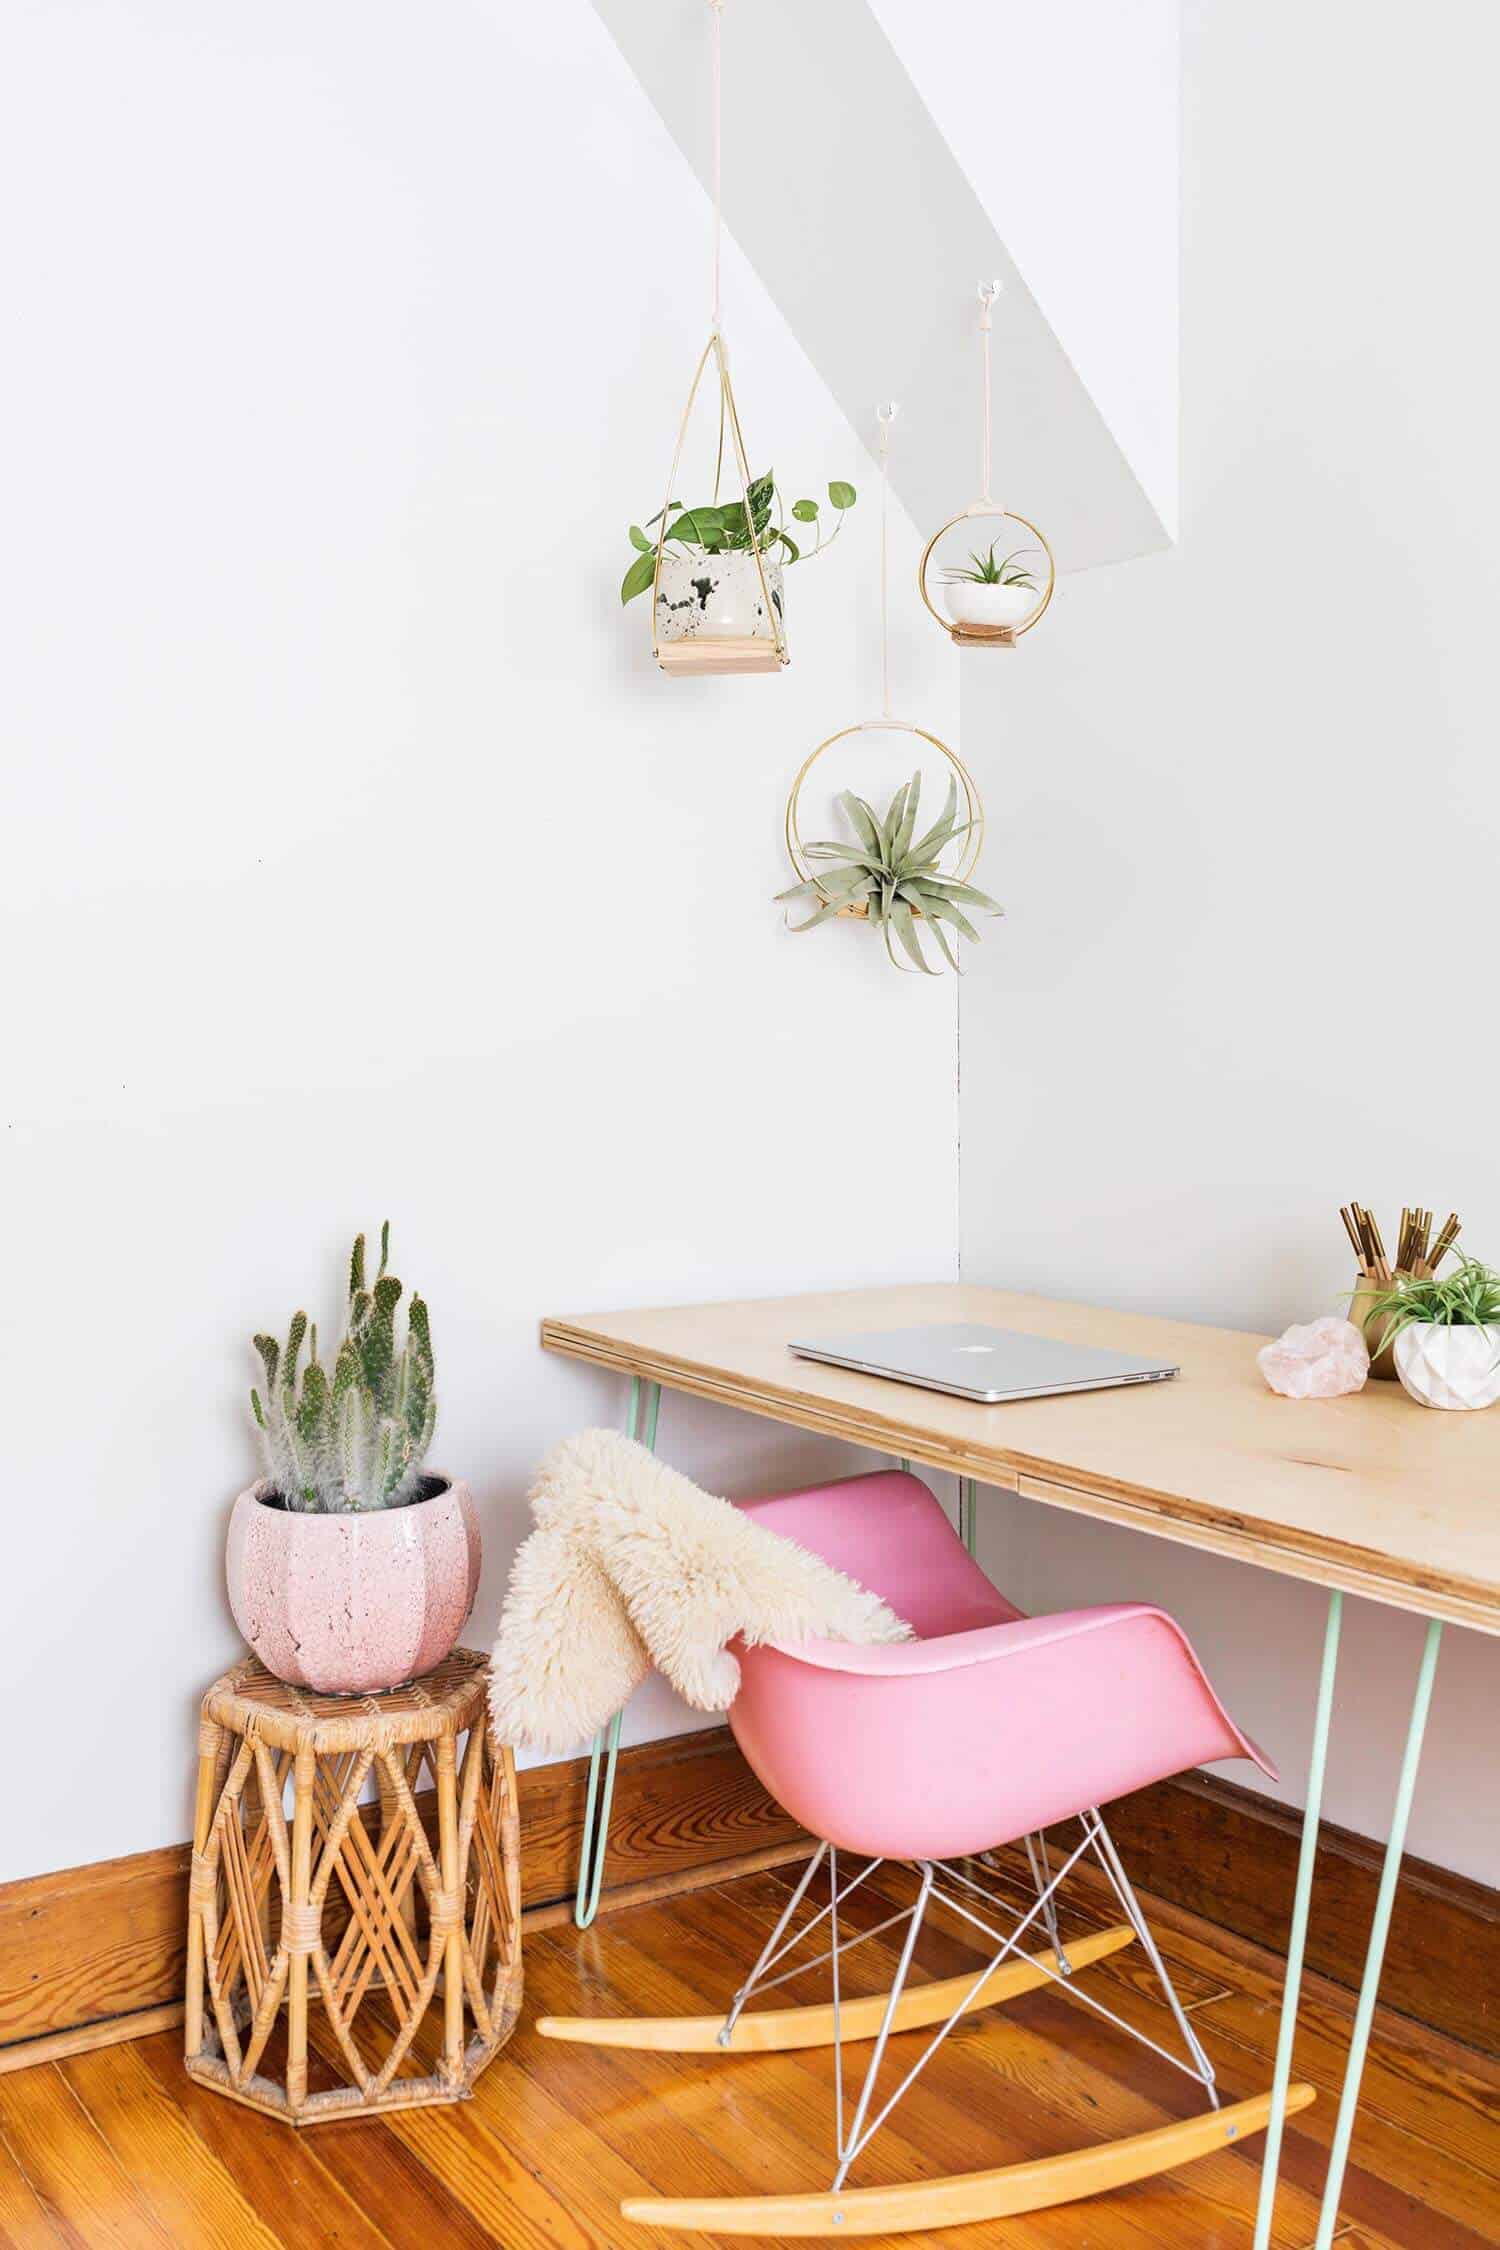 https://cdn.apartmenttherapy.info/image/upload/v1623790158/at/Mid-century-planter-tutorial-for-A-Beautiful-Mess.jpg